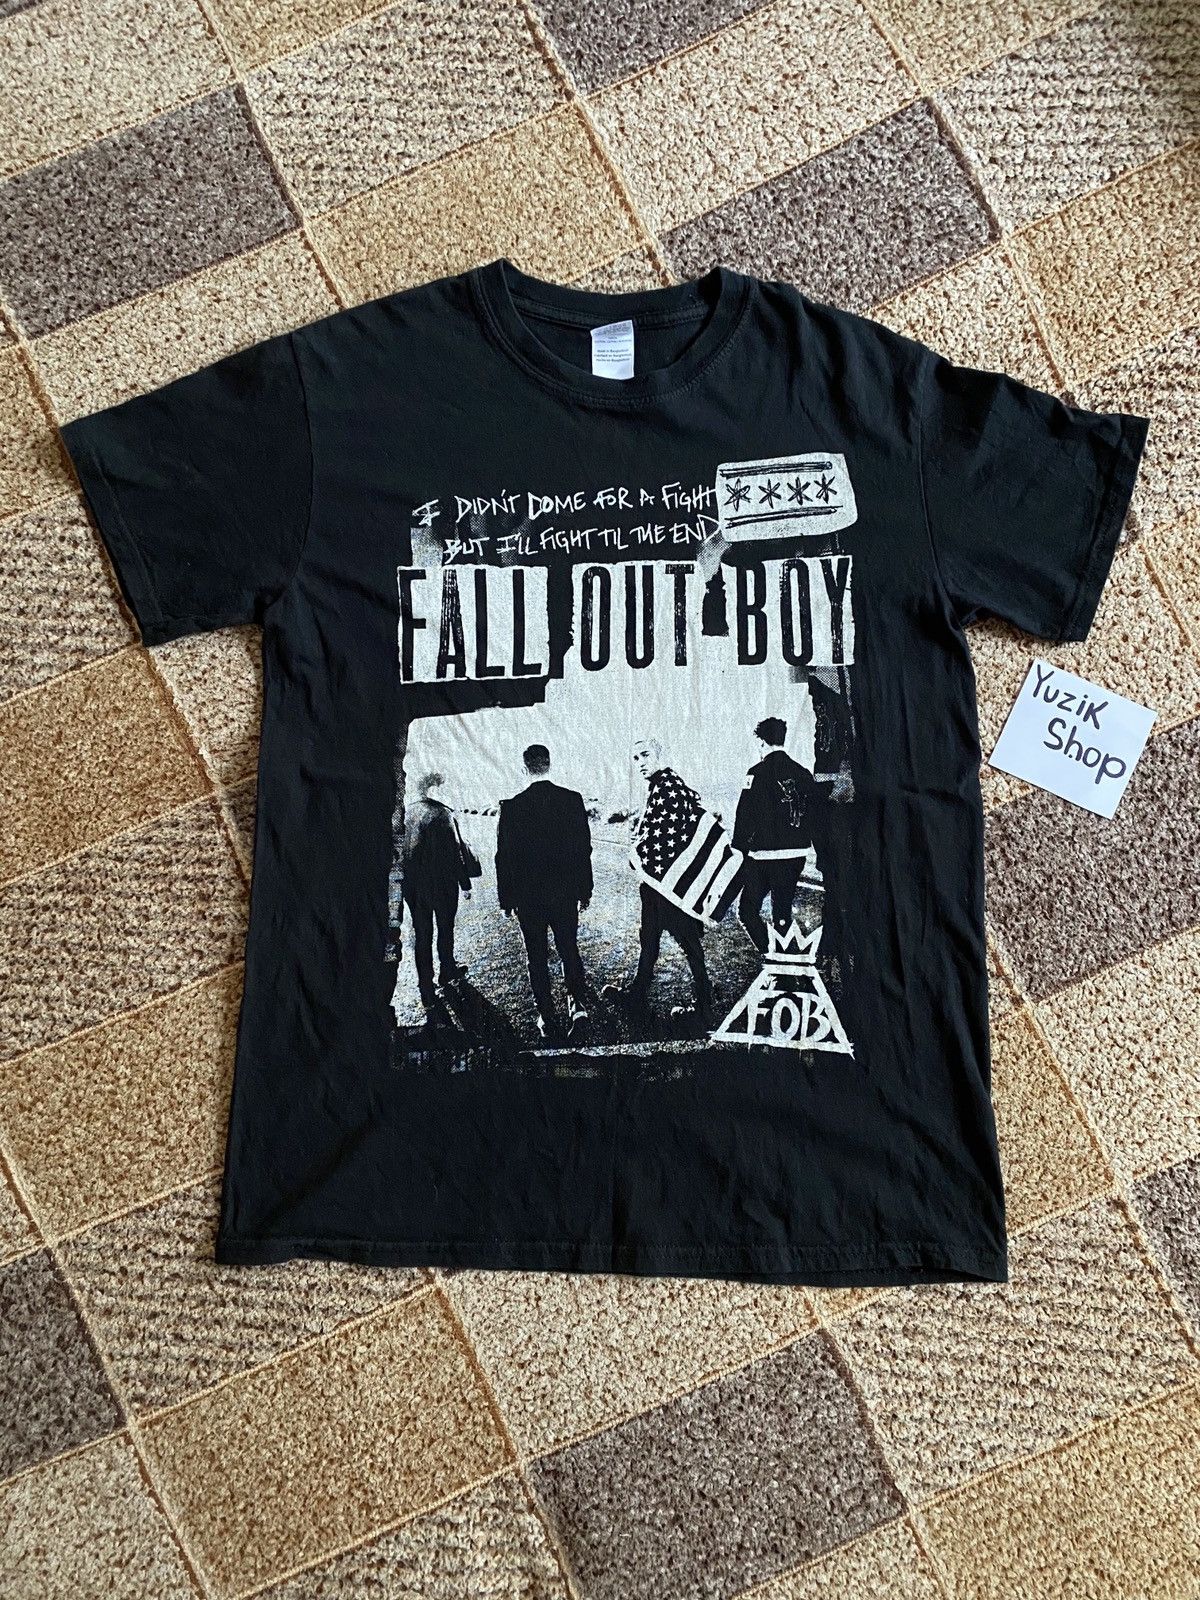 Fall Out Boy 2001 | Grailed